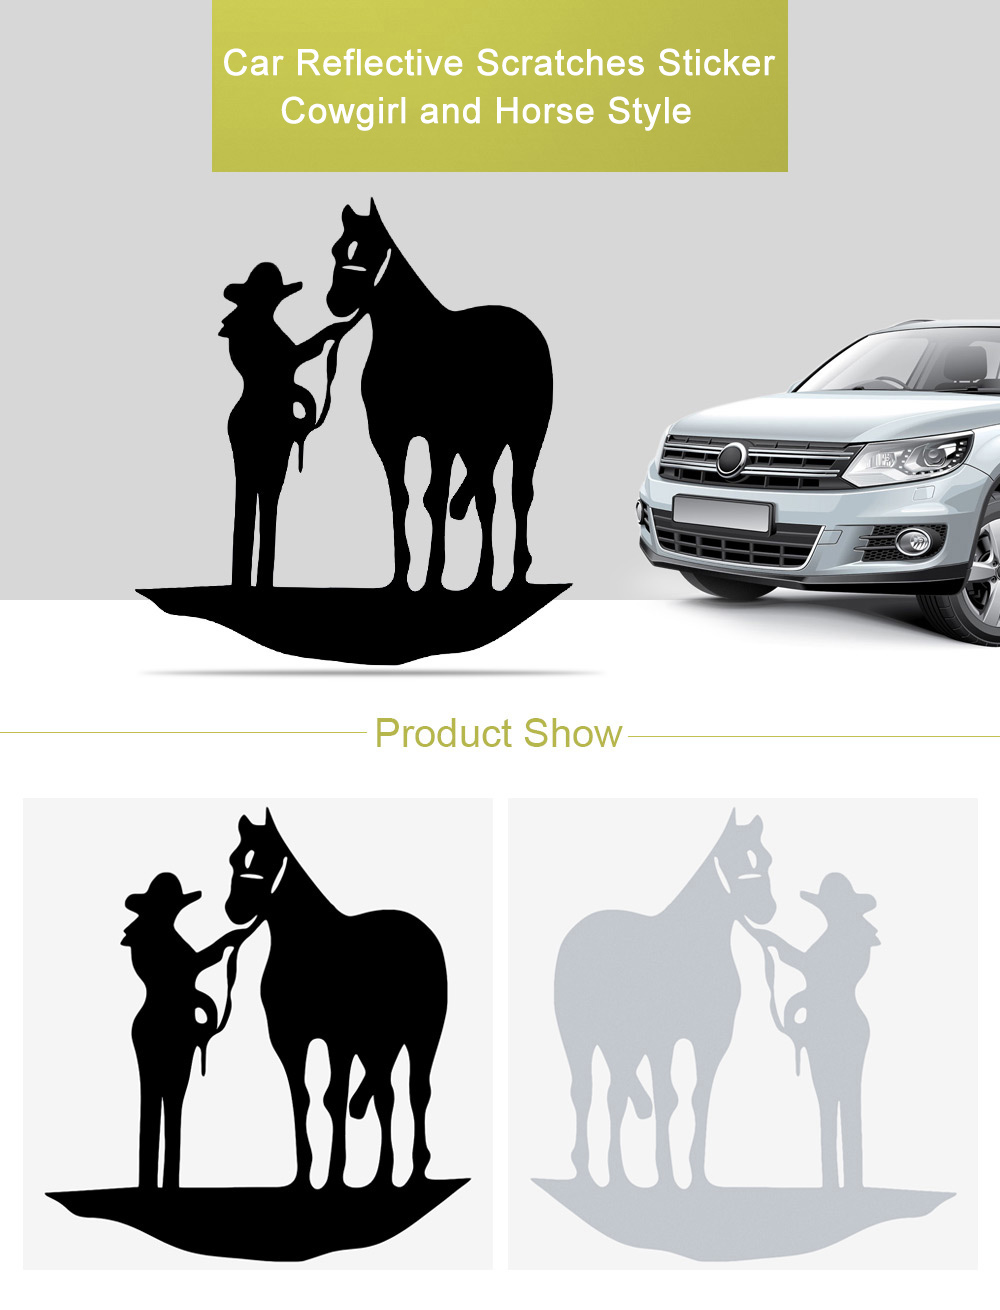 Car Reflective Scratches Sticker Cowgirl and Horse Style